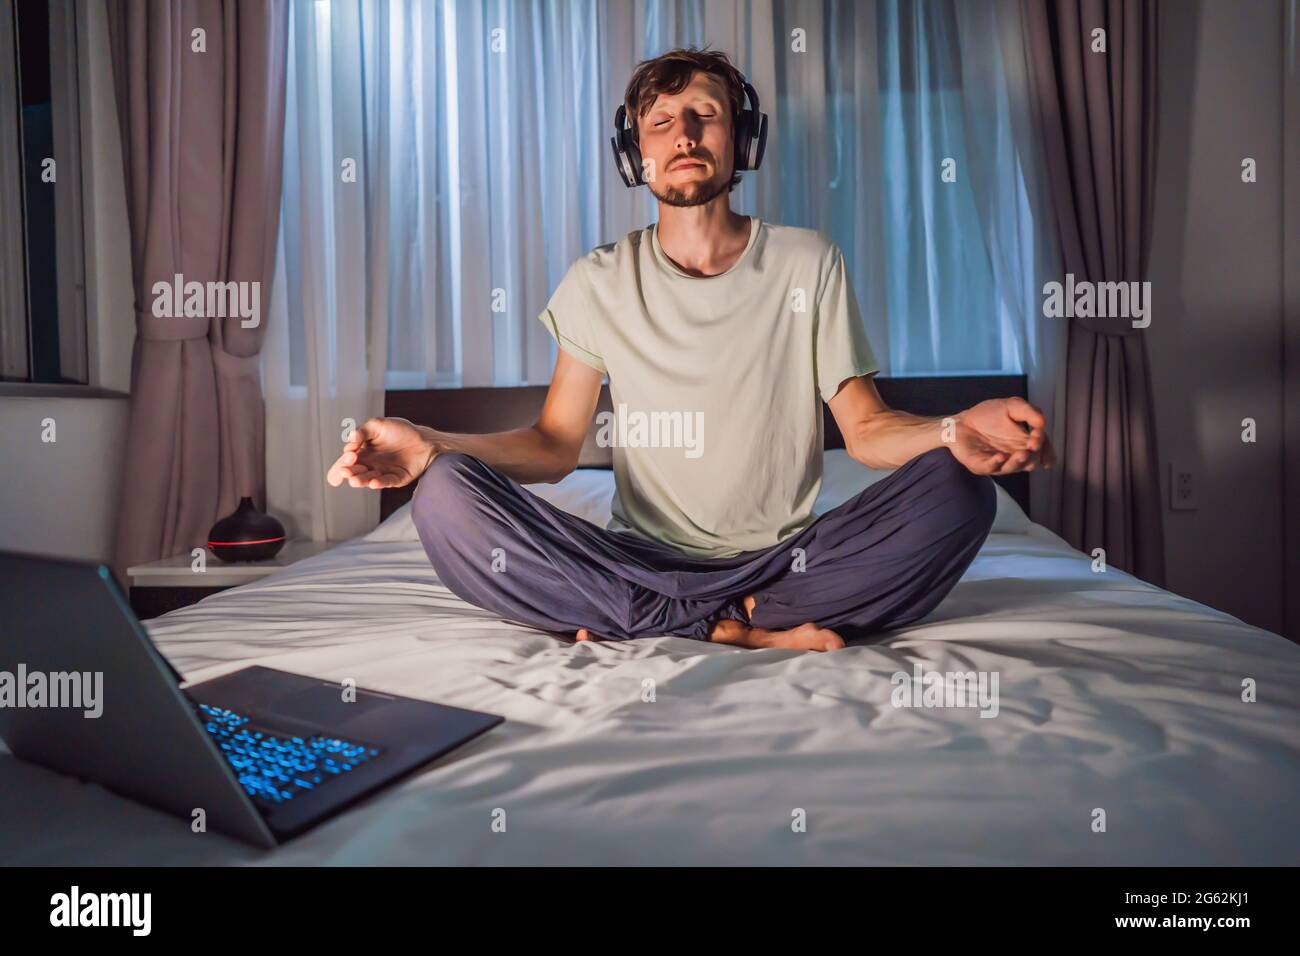 Man meditates on bed using meditation app. sport, technology and healthy lifestyle concept Stock Photo